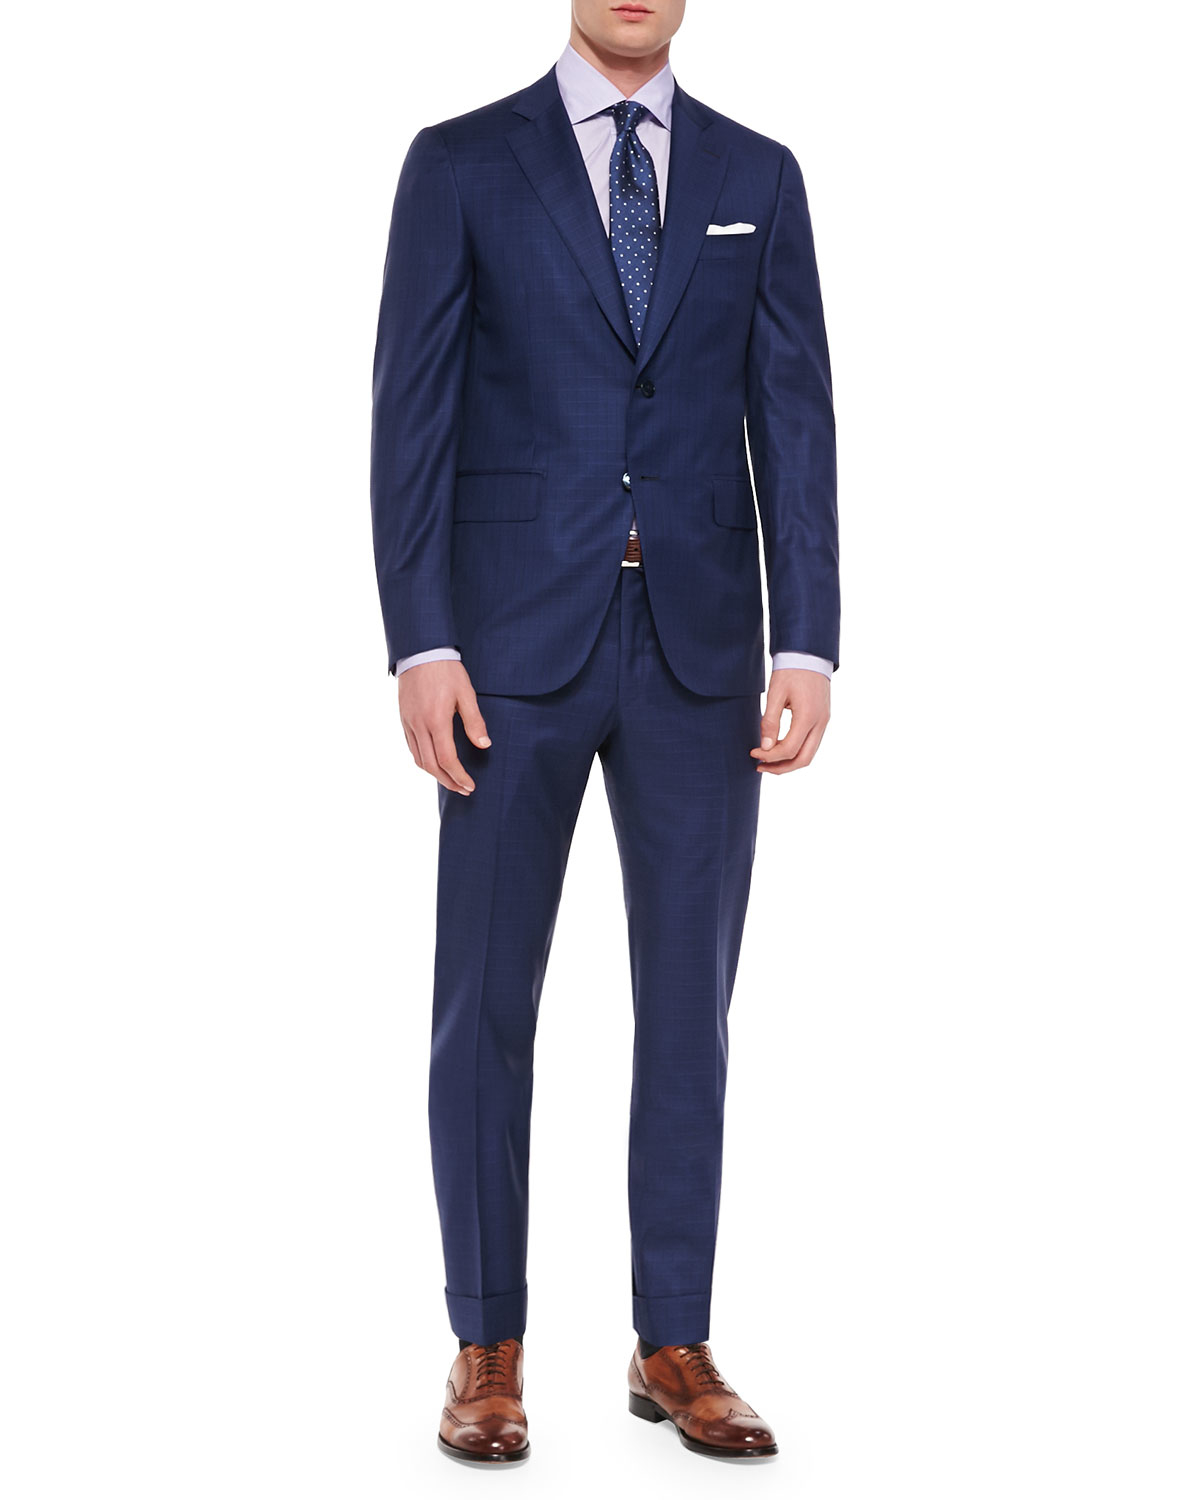 Isaia Box Check Two-piece Suit in Blue for Men - Lyst